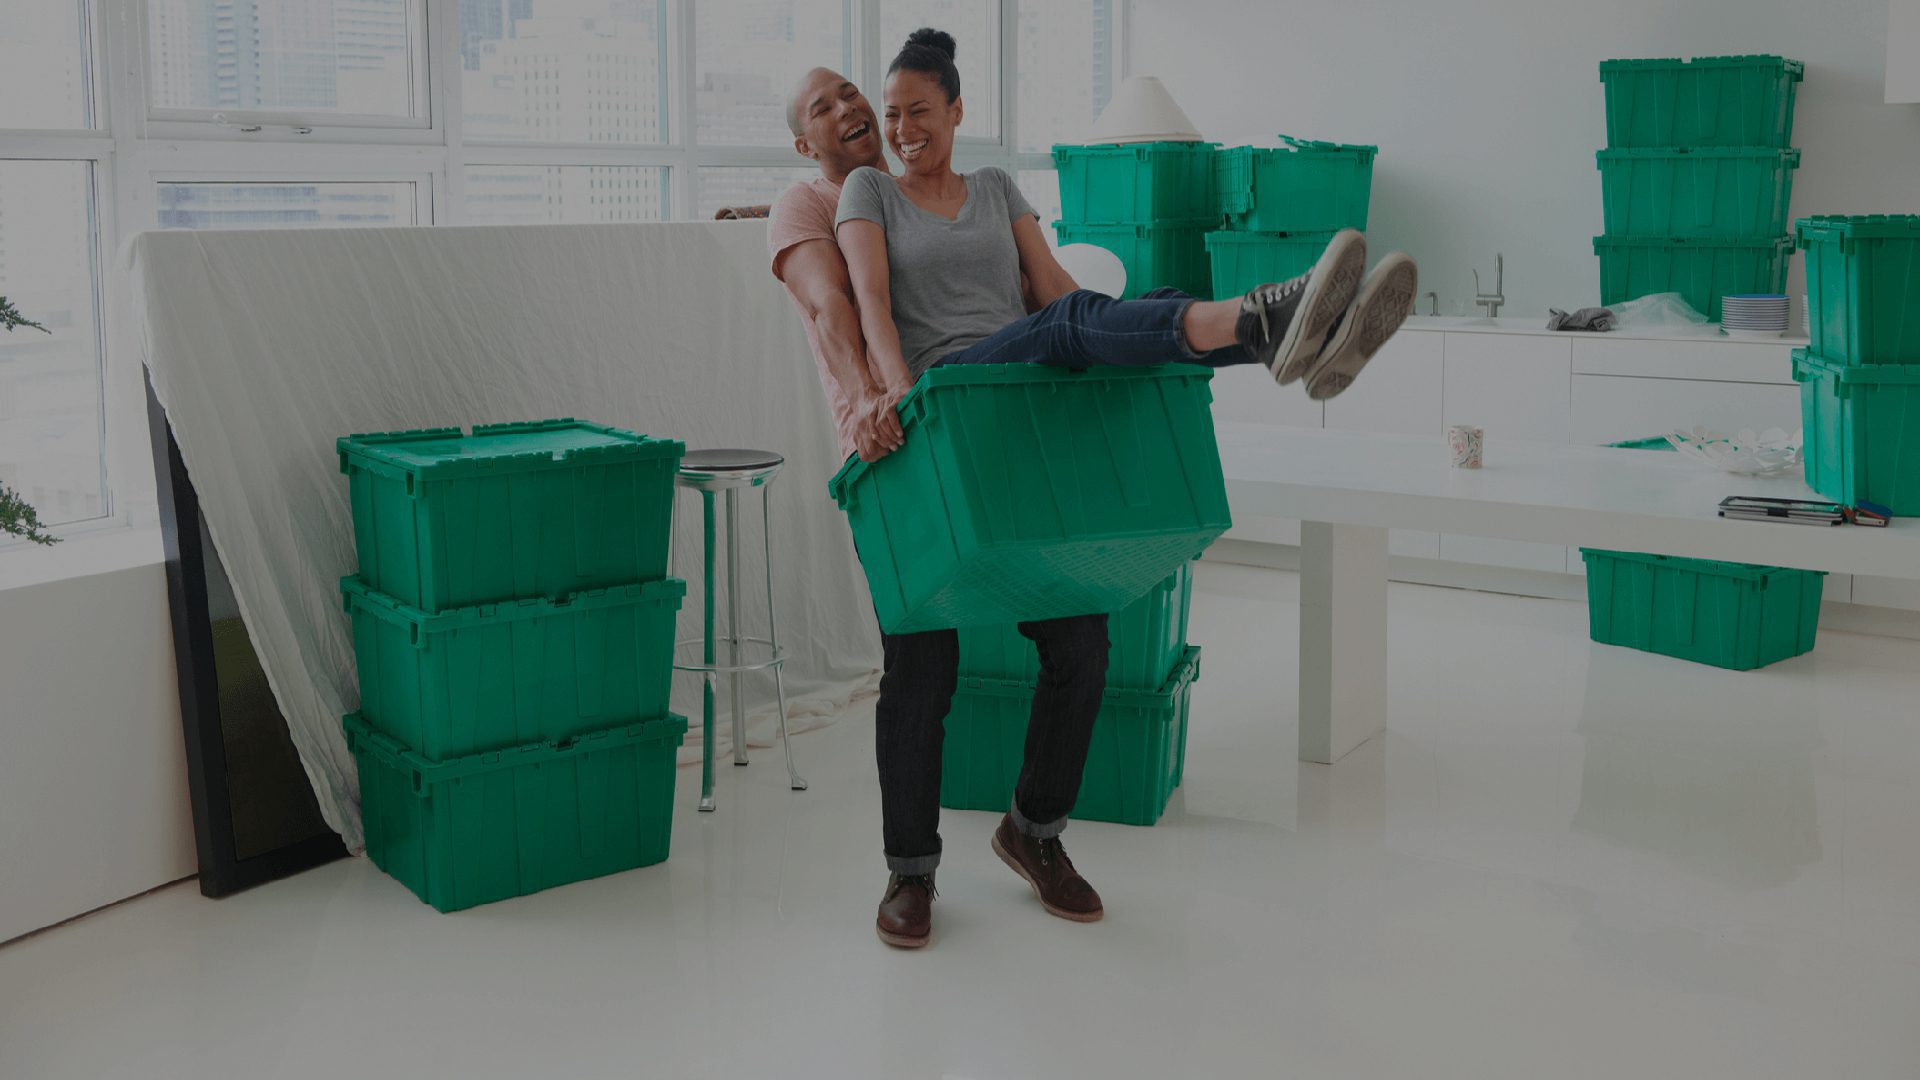 https://www.quicktotes.com/wp-content/uploads/2019/08/man-carrying-woman-on-bin.jpg